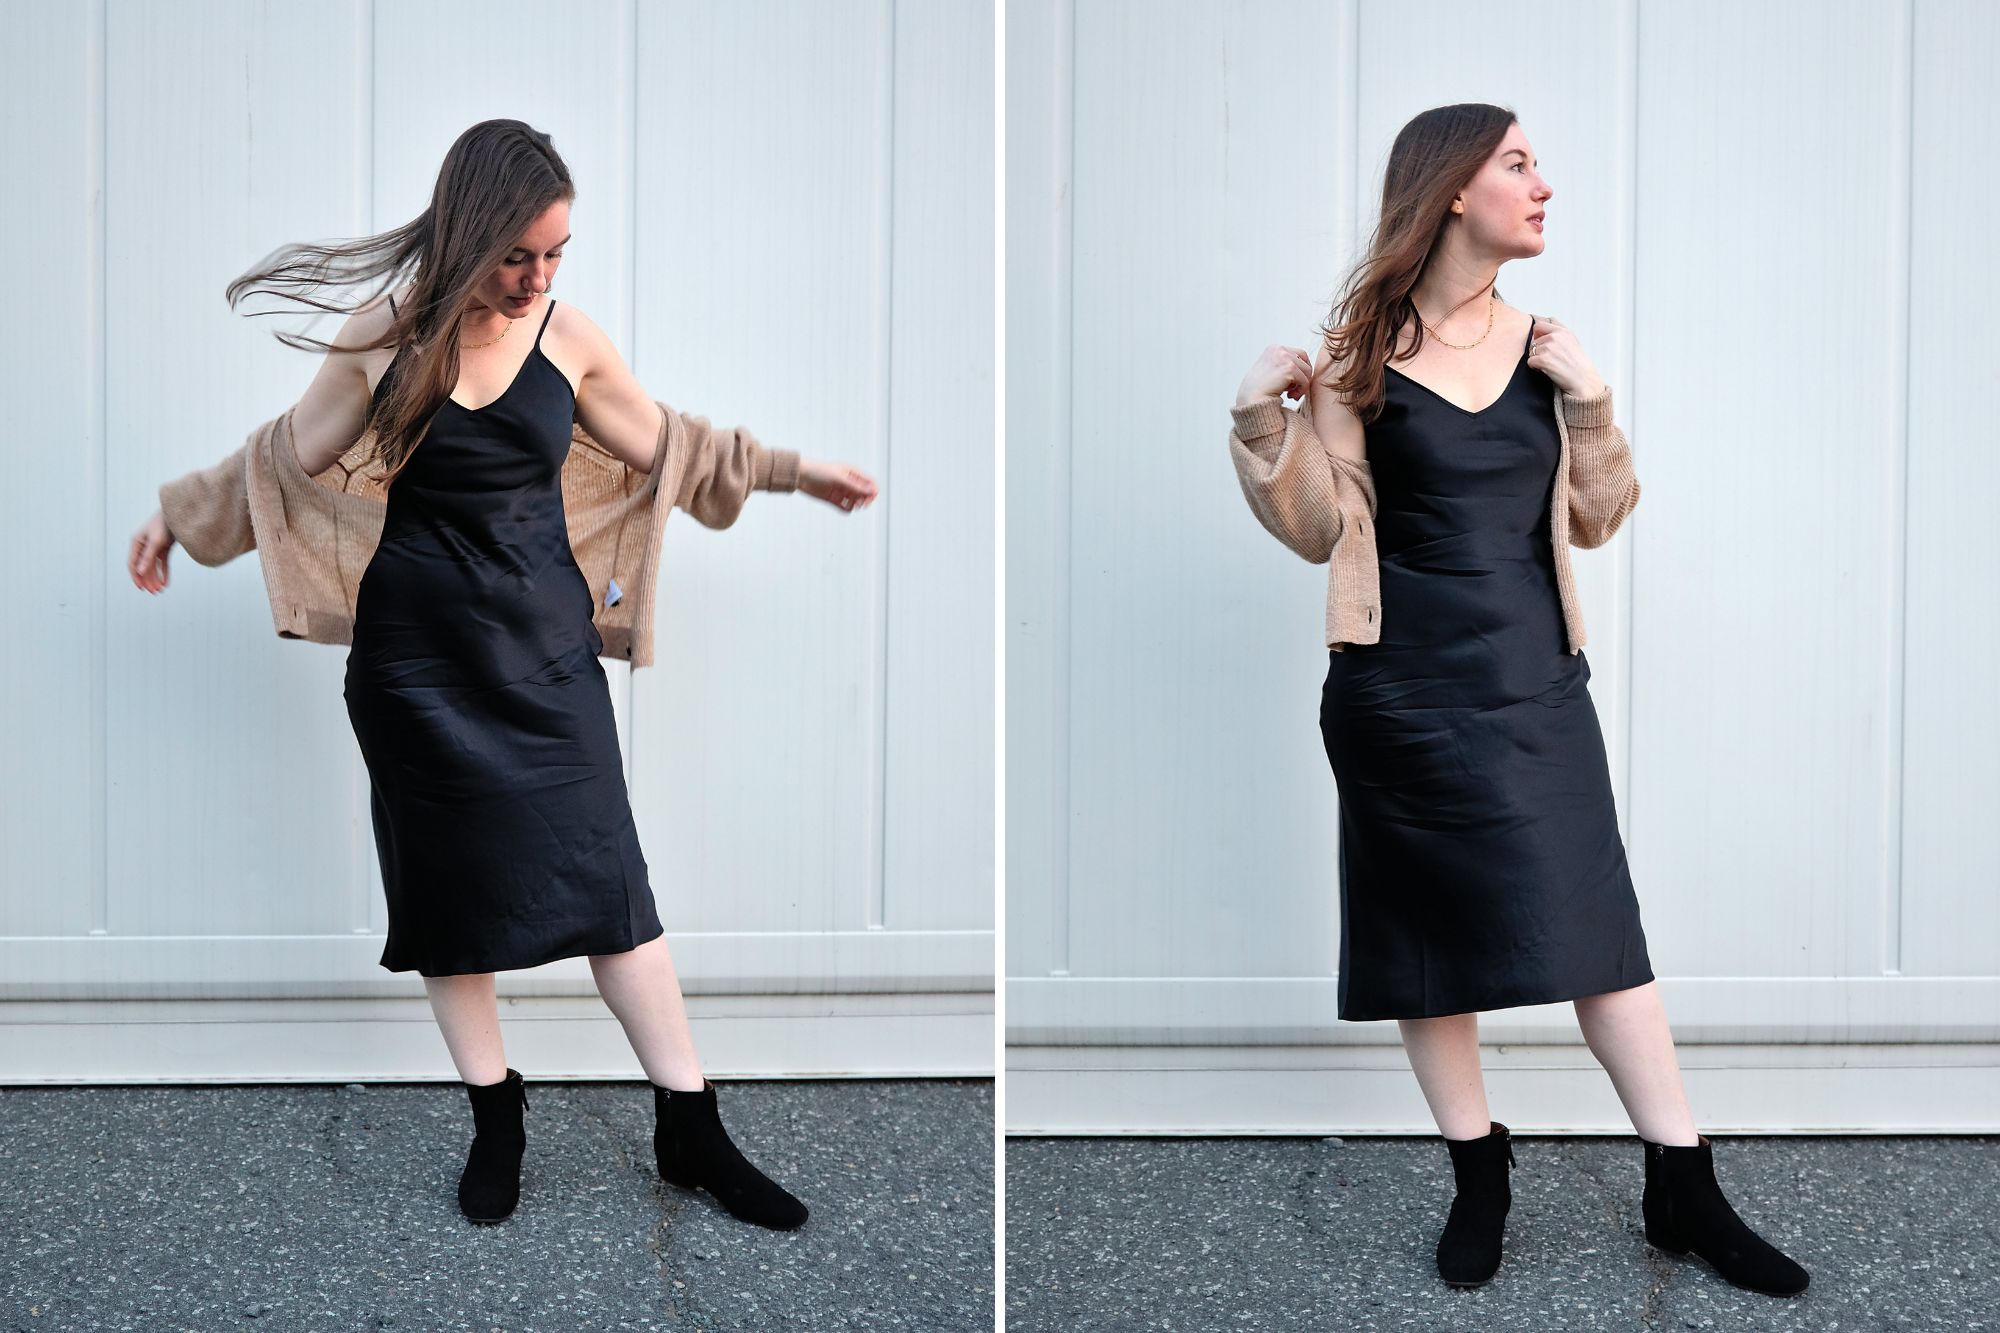 Alyssa wears the Quince dress with black boots and a beige cardigan